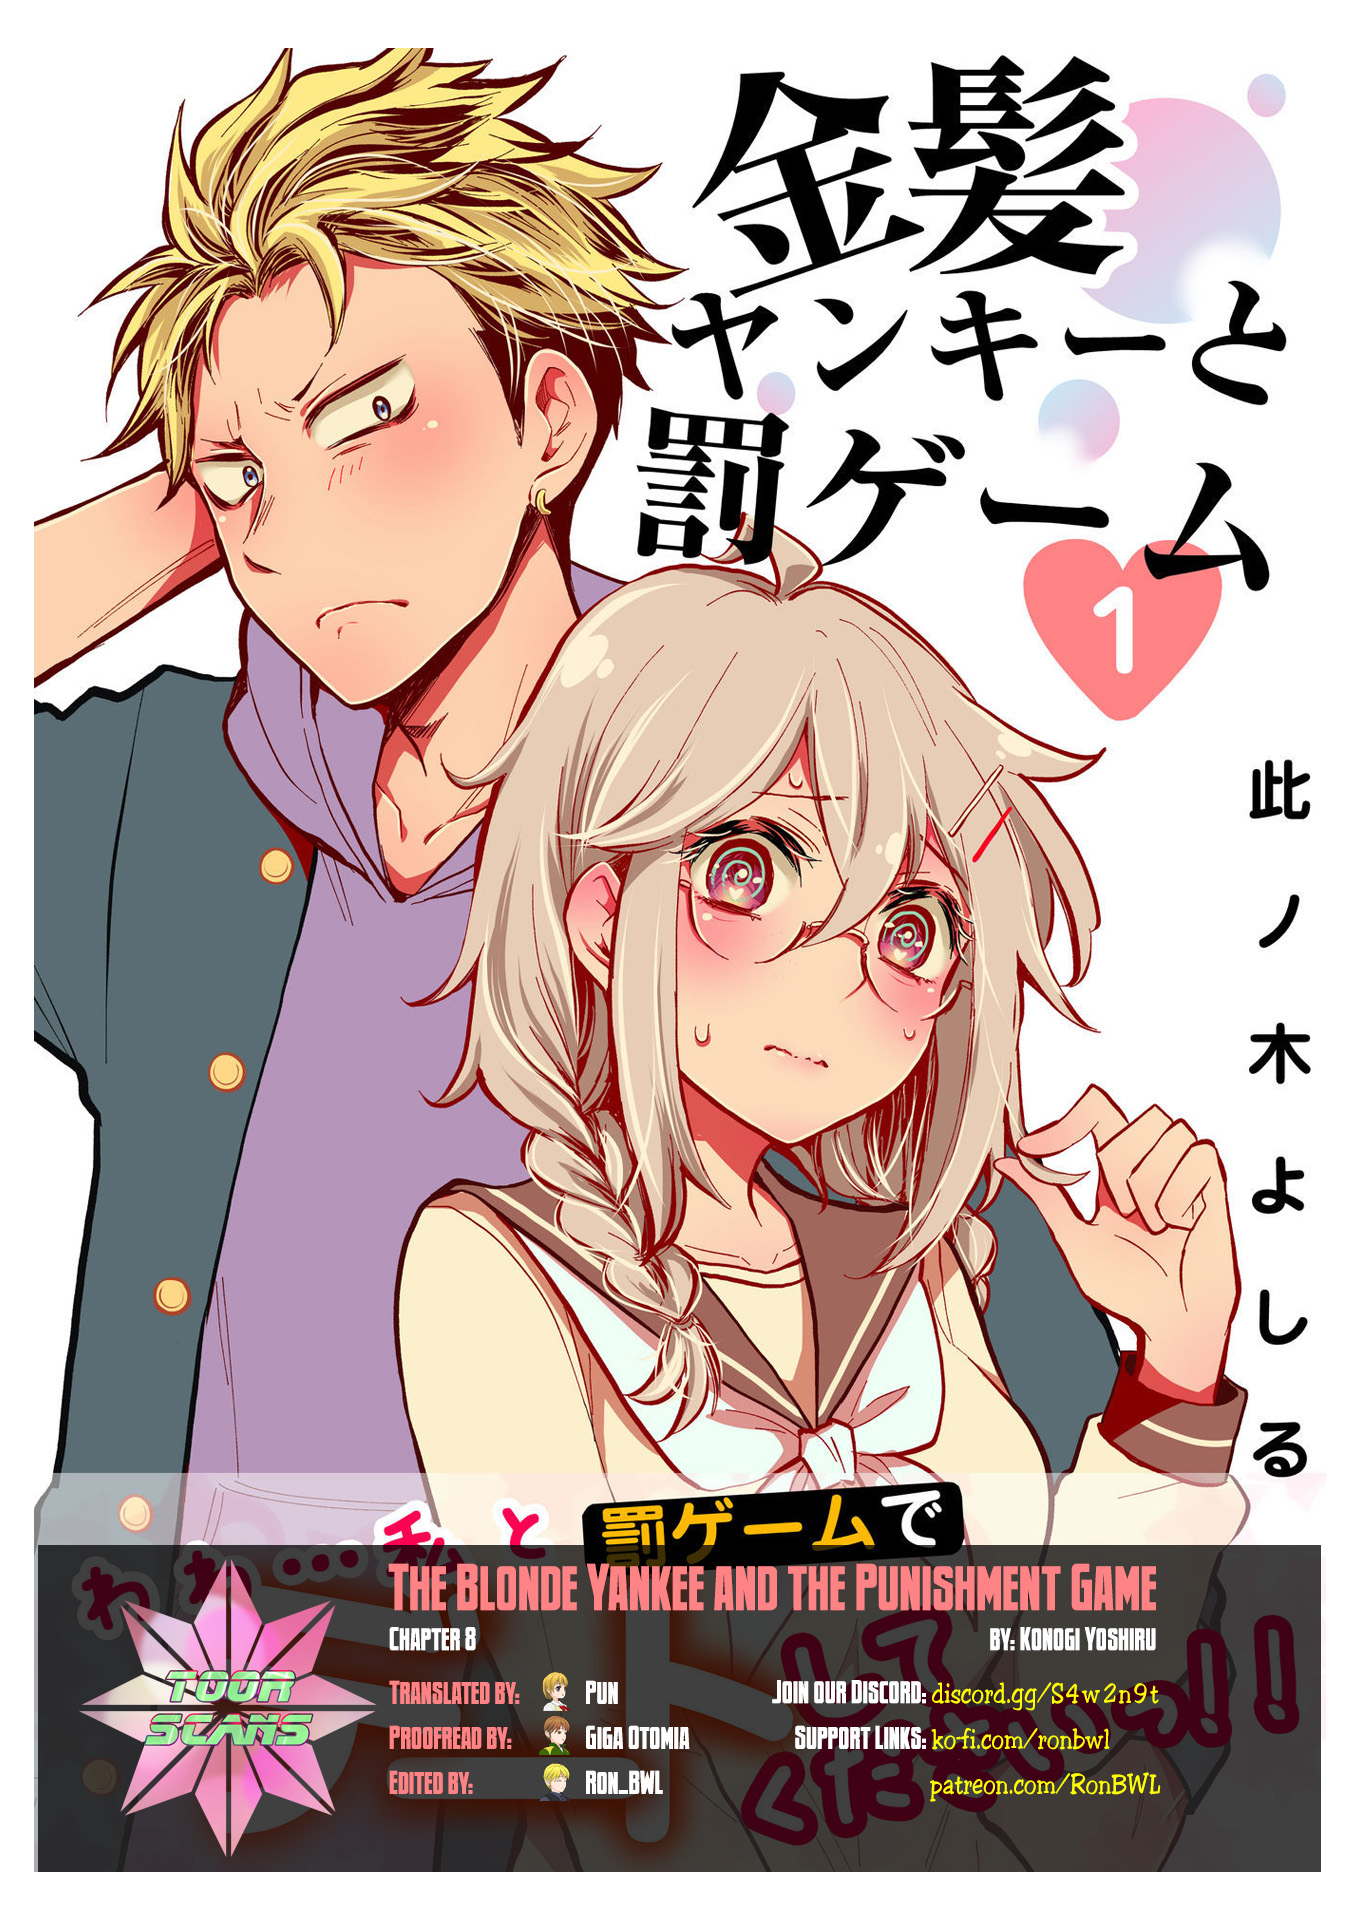 Blond Yankee And Punishment Game Vol.1 Chapter 8